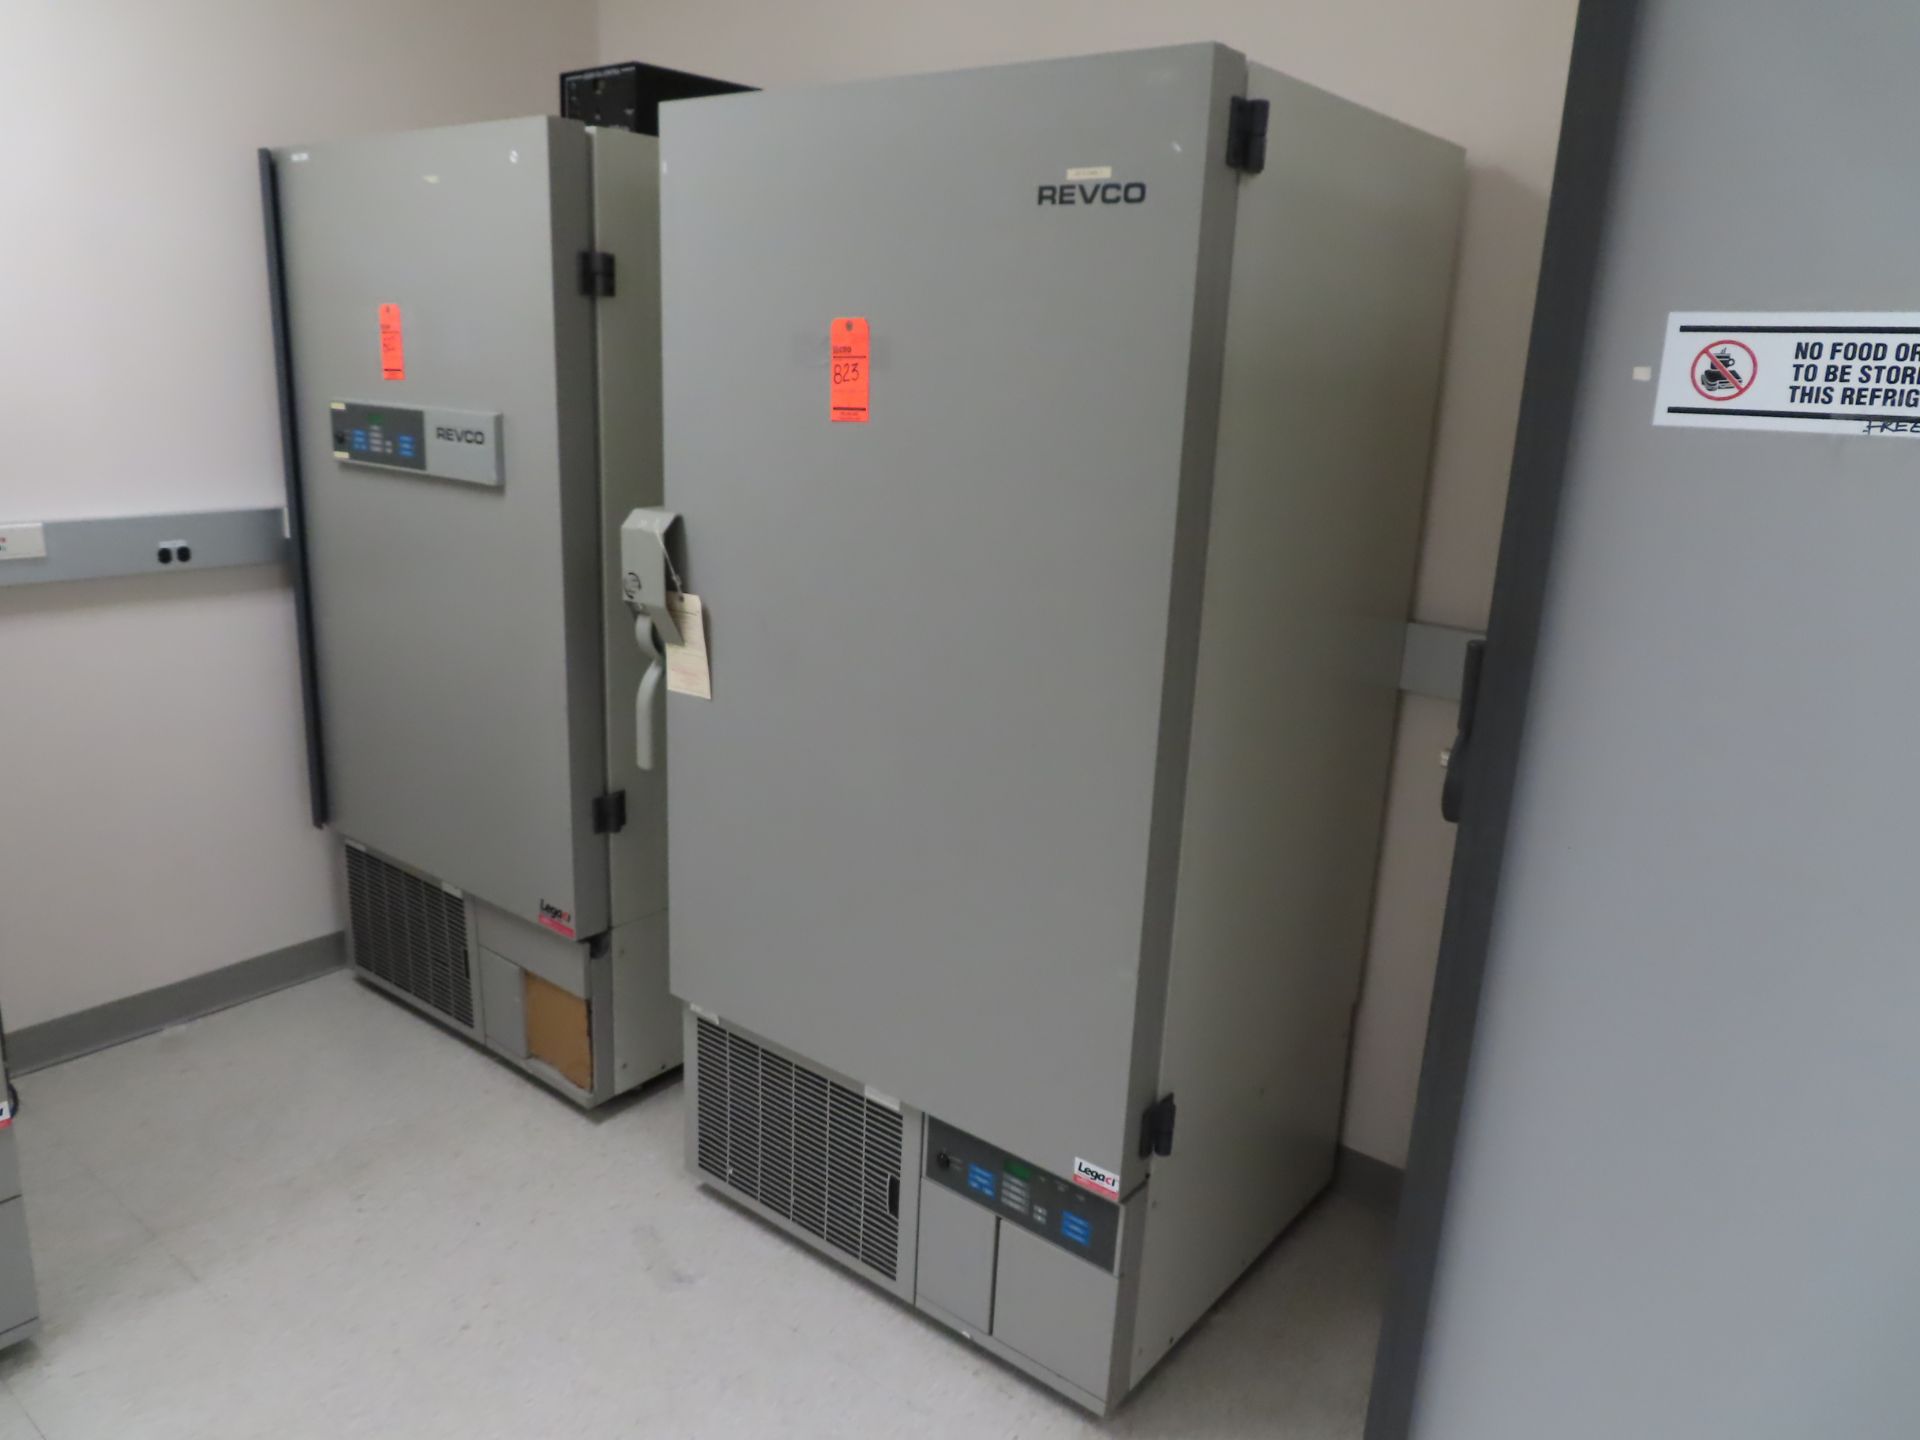 Revco ULT2186-5-A35 Biomedical freezer, s/n R04M-576400-RM, located B wing, 3rd floor, room 360A